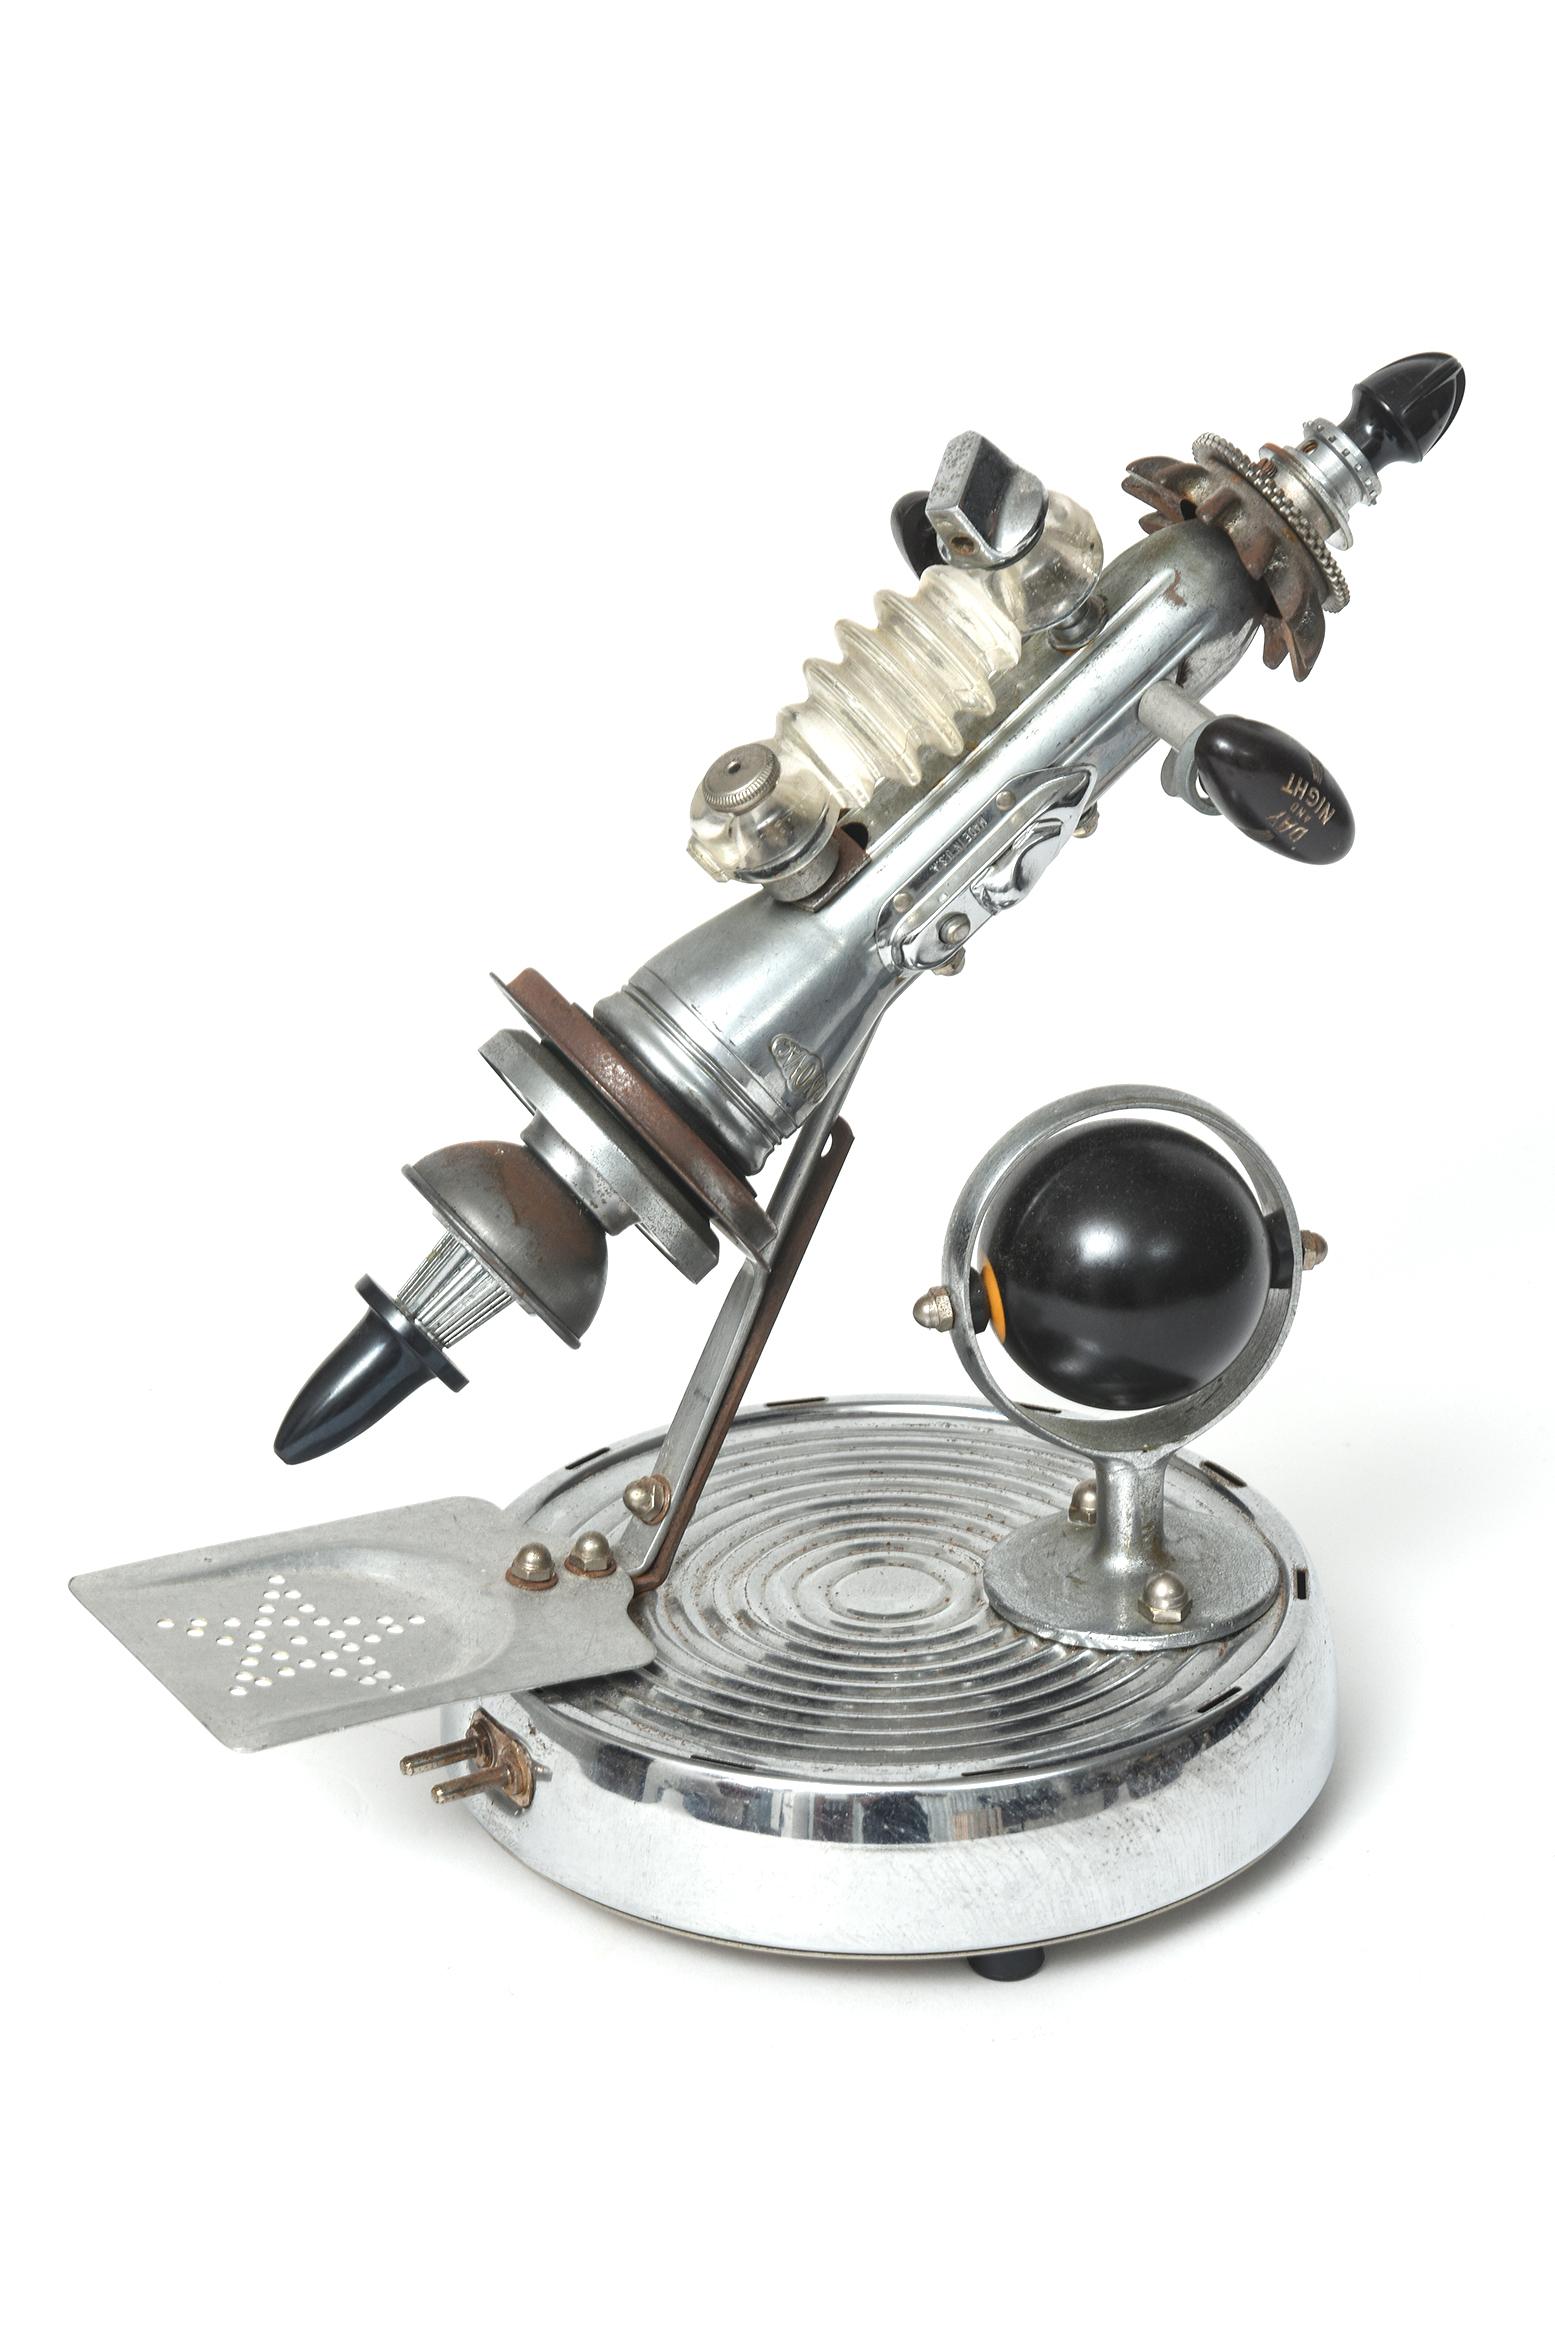 Metal space age rocket art sculpture titled VFR Zeta II by J. Bescant dated 10/2000. This extraordinary futuristic piece features a rocket leaving its launchpad and orbiting a planet. It was created completely from ordinary metal pieces such as a